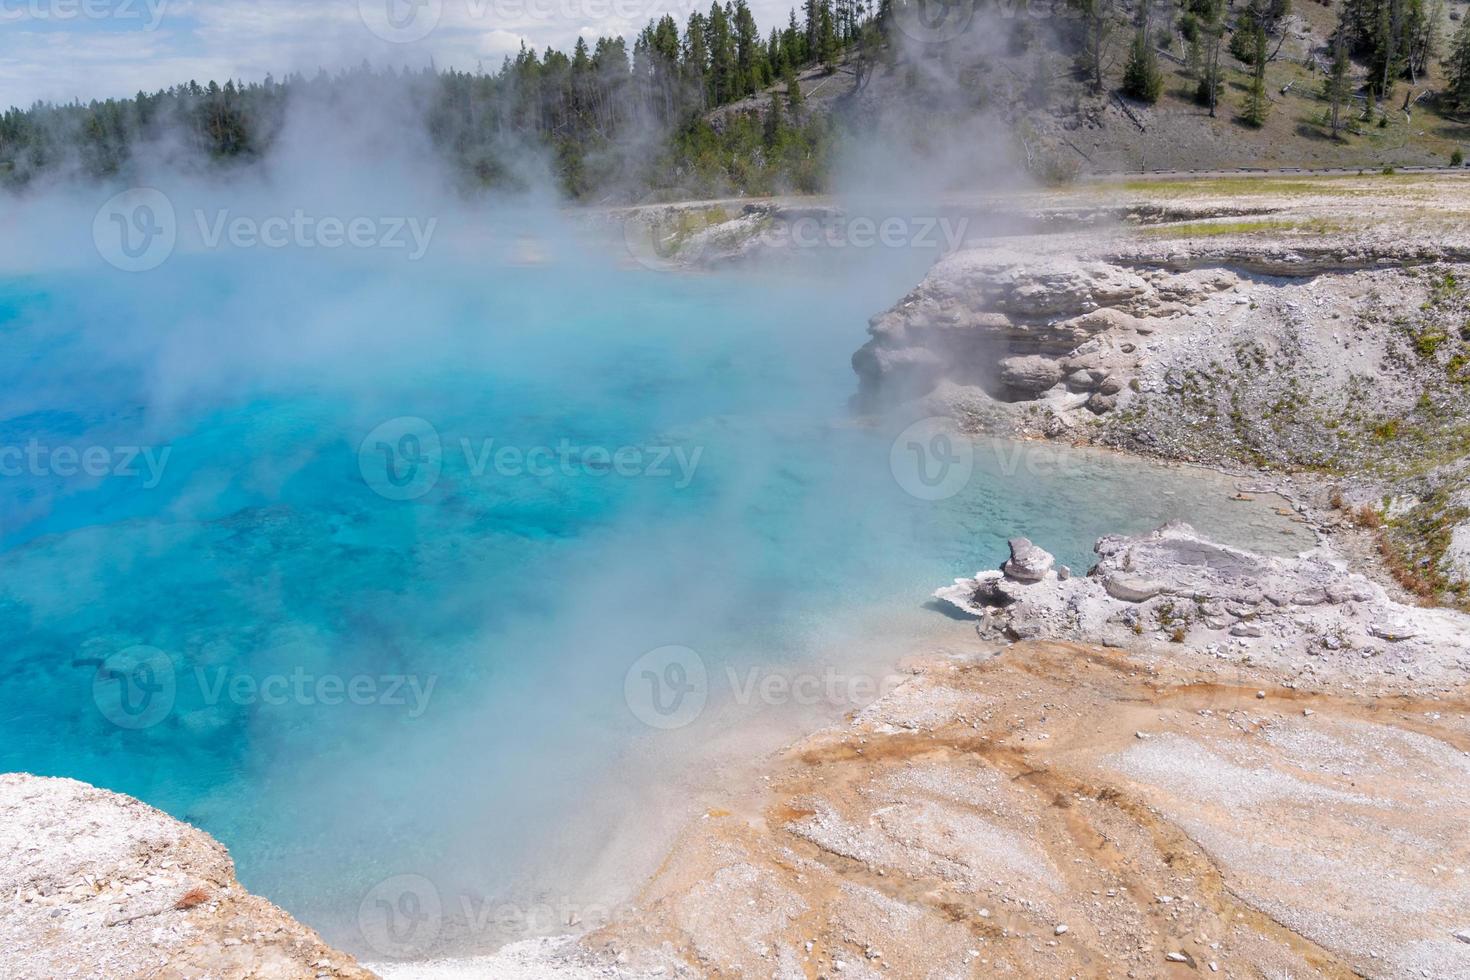 The bright blue pool of Excelsior Geyser at the Midway Geyser Basin in Yellowstone National Park. photo